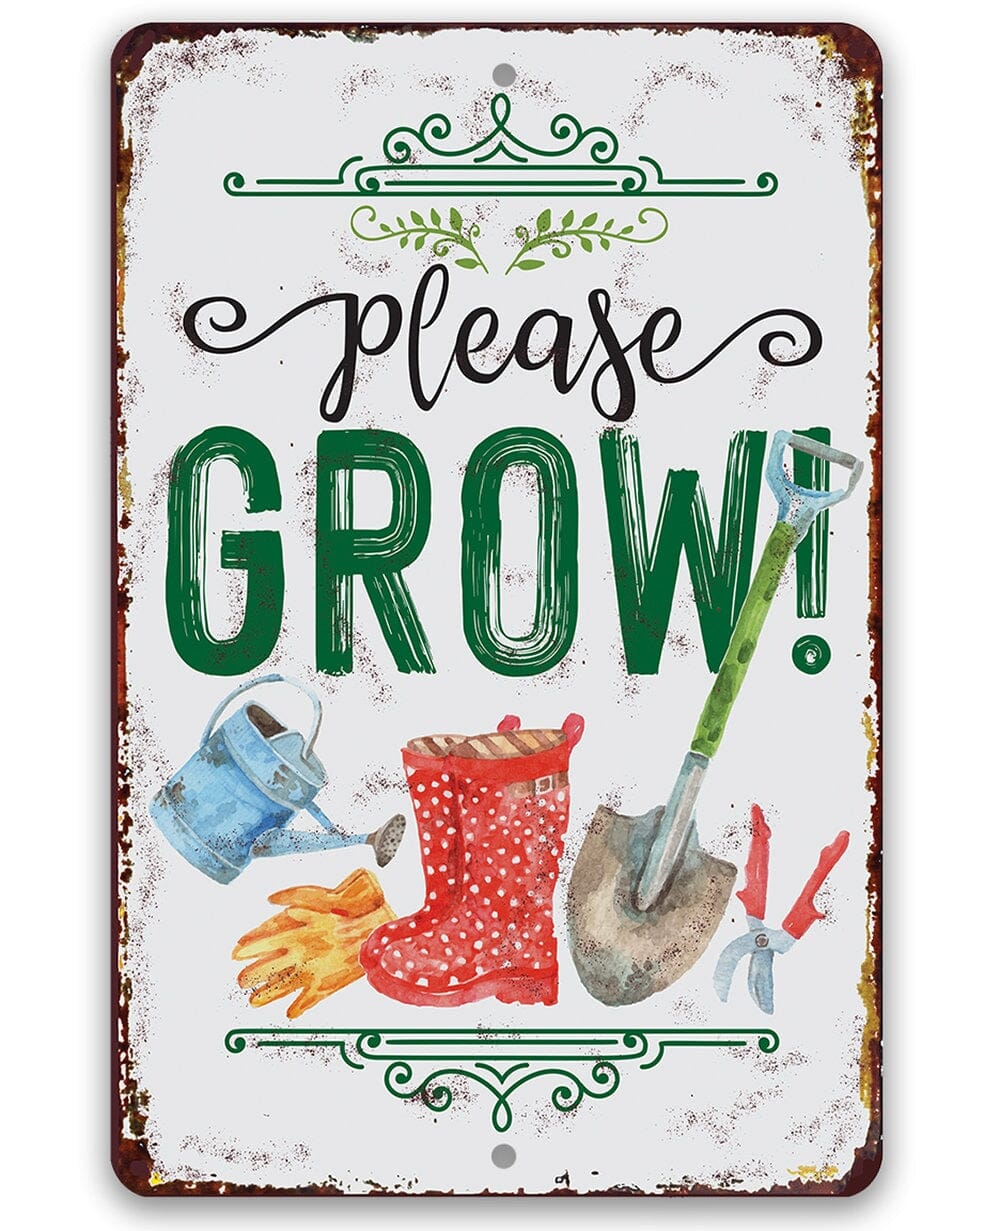 Durable Metal Sign - Please Grow! - Use Indoor/Outdoor - 8" x 12" or 12" x 18" Aluminum Tin Awesome Metal Poster Lone Star Art 